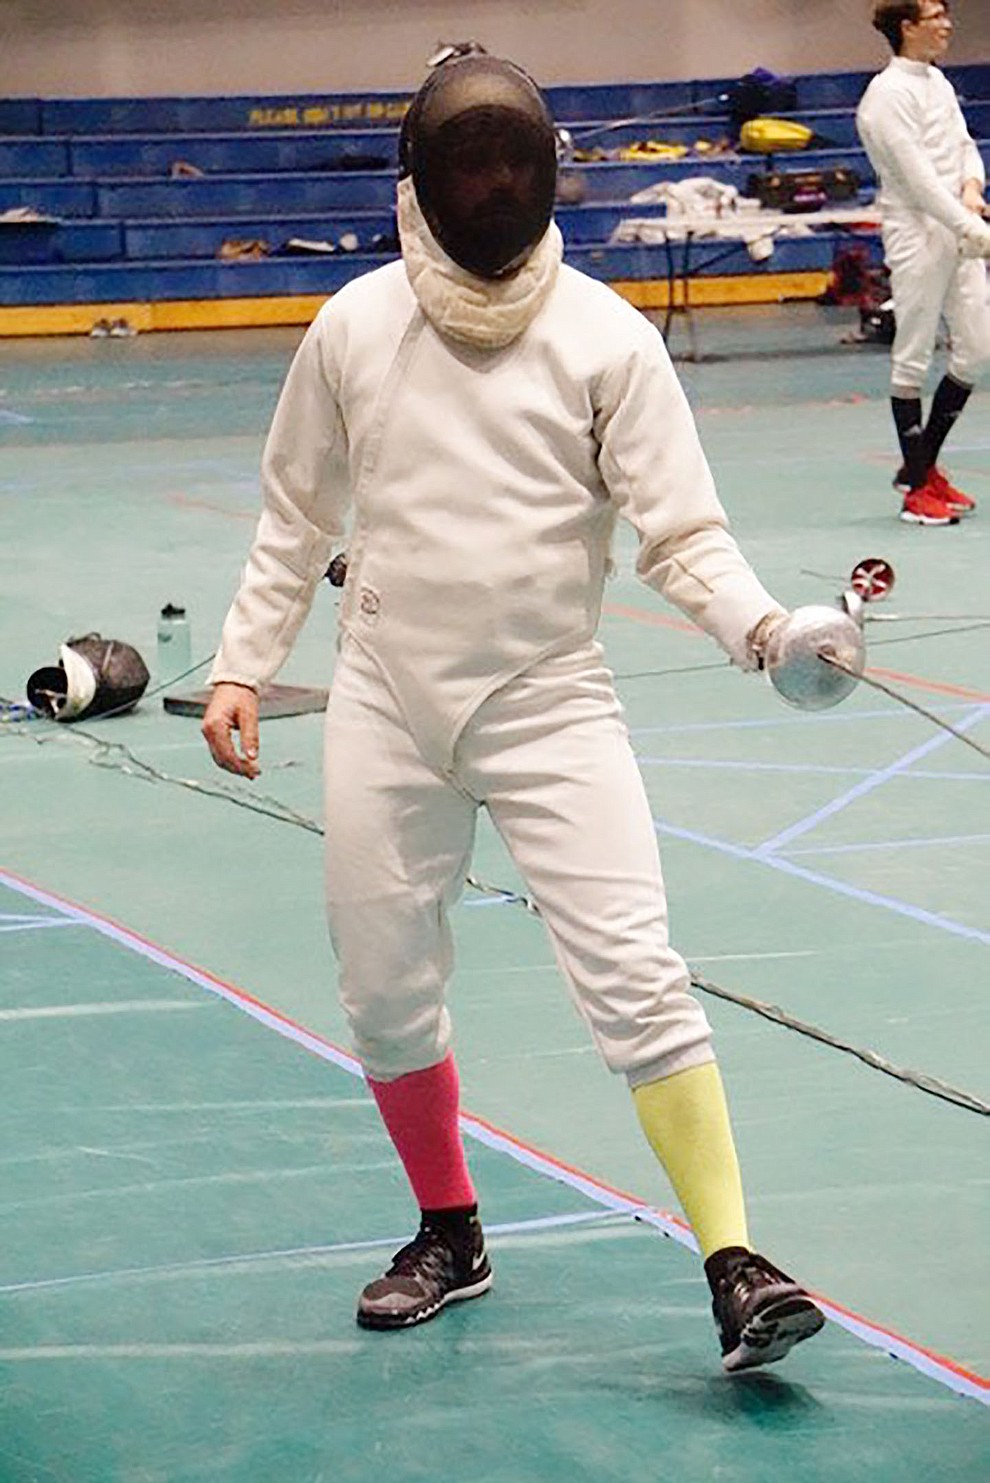 Braden Wiegand-Shahani of Salle d’Escrime of Prescott competes during the 25th Annual Prescott Fall Fencing Tournament at Prescott High School on Sunday, Sept. 1, 2019. (Aaron Valdez/Courier)